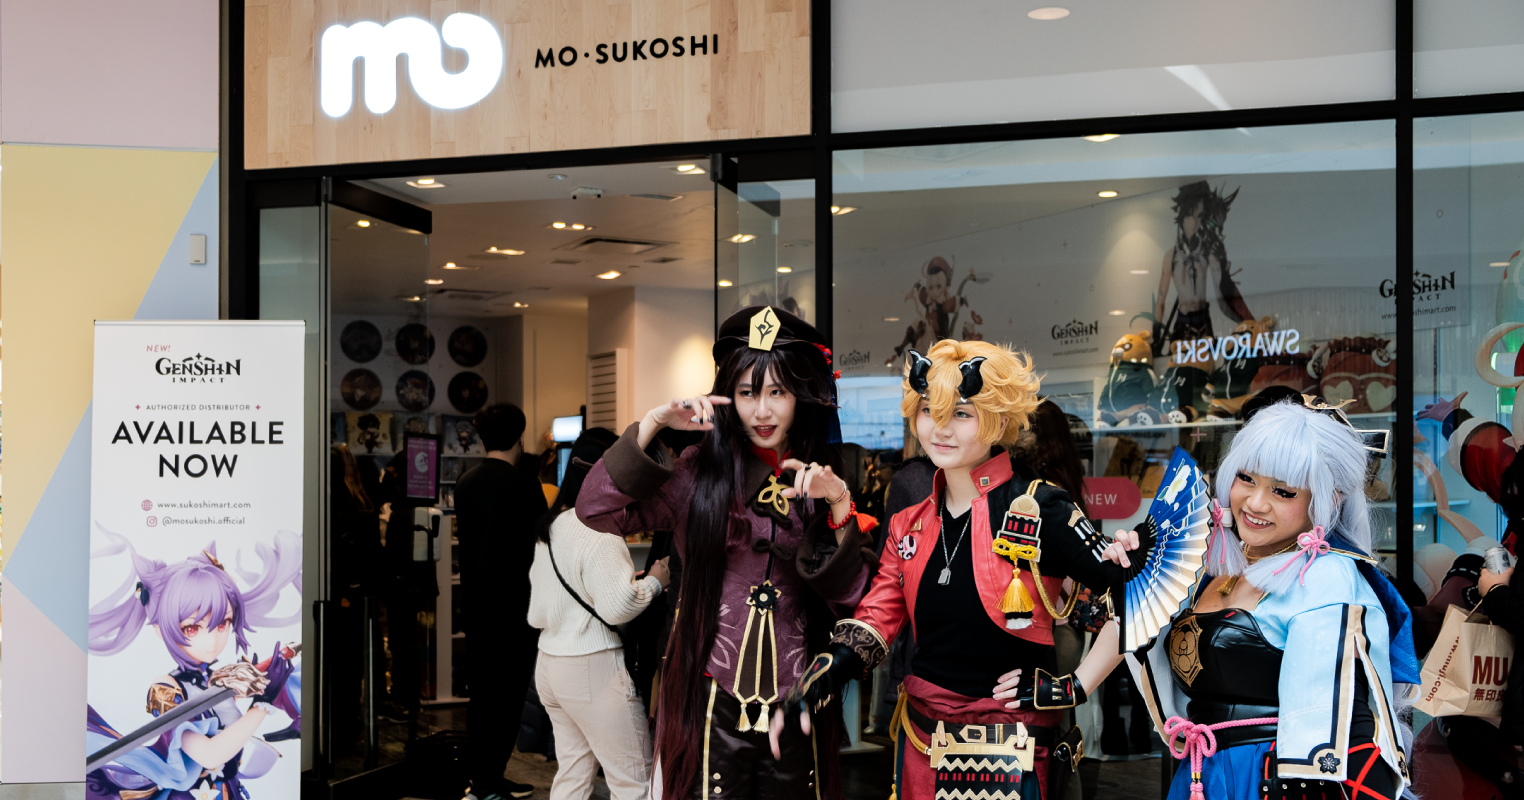 Genshin Impact Cosplayers In Front of the Genshin Impact Launch at MO-SUKOSHI in Scarborough Town Centre